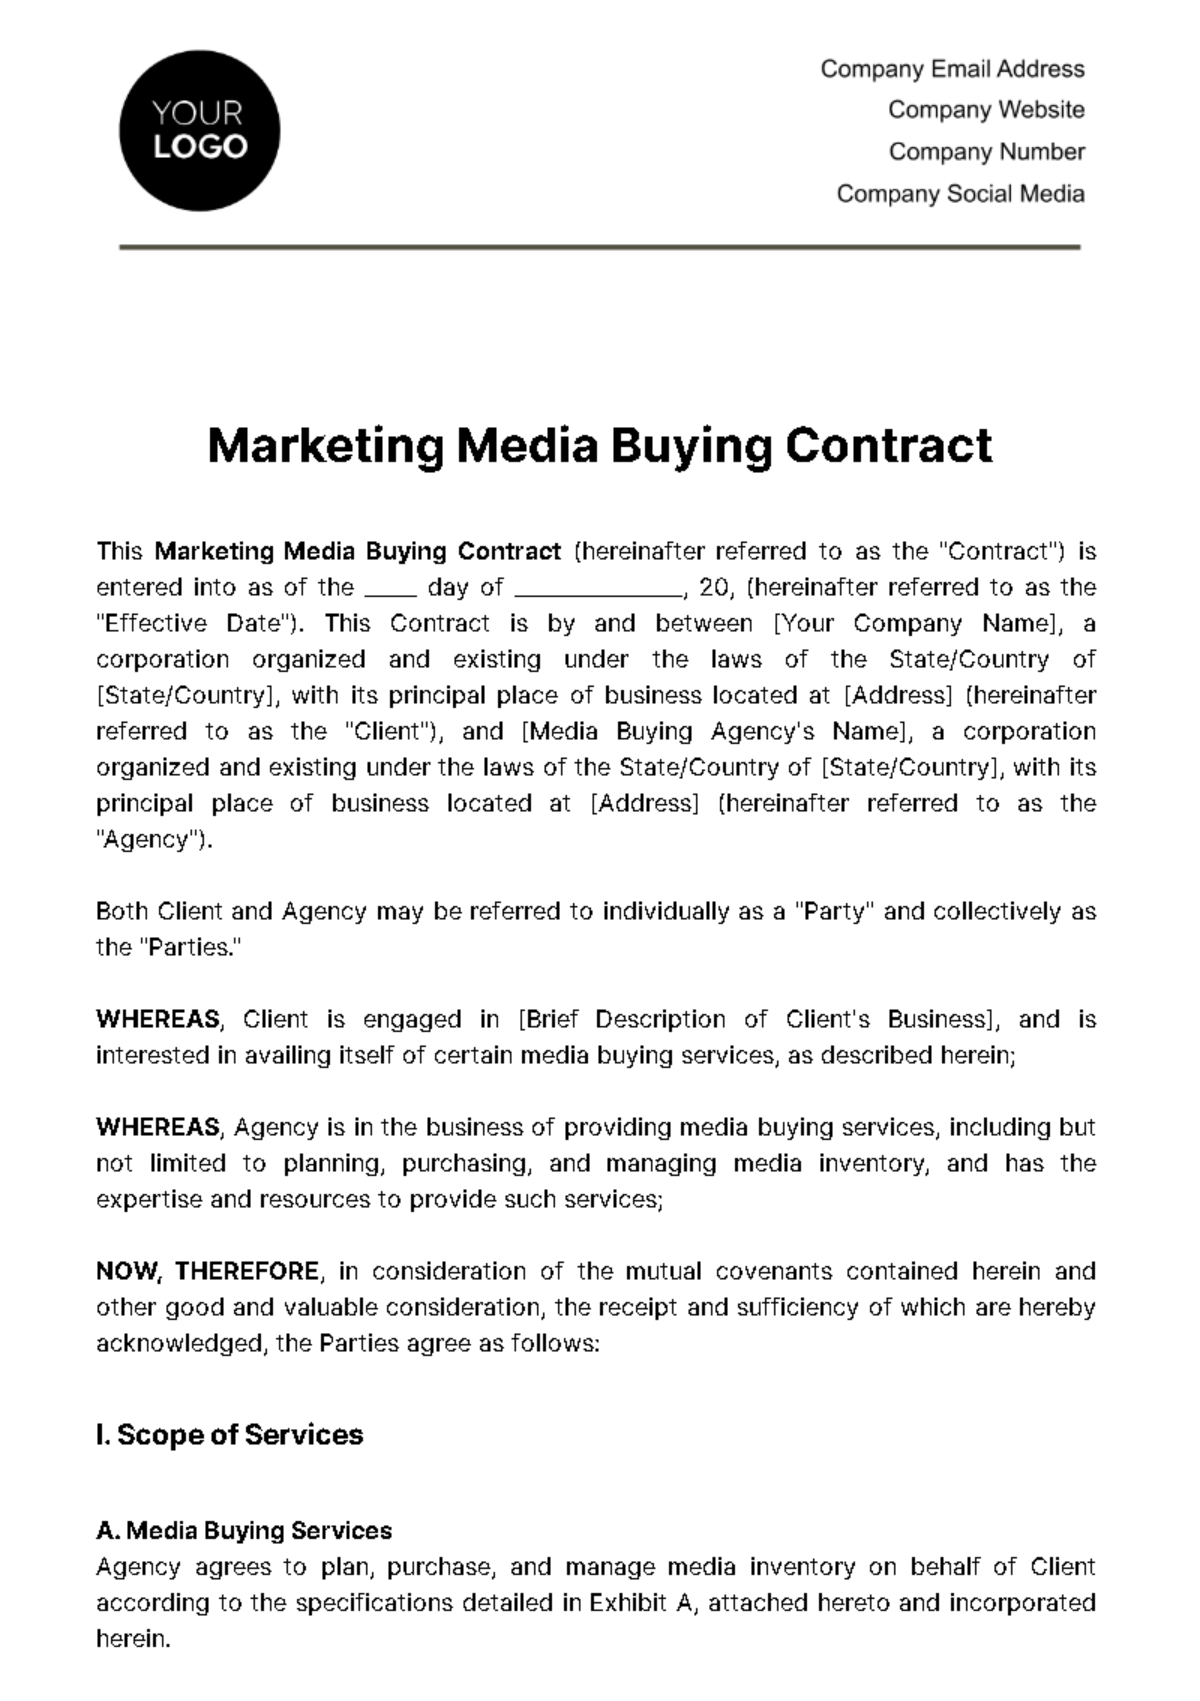 Free Marketing Media Buying Contract Template